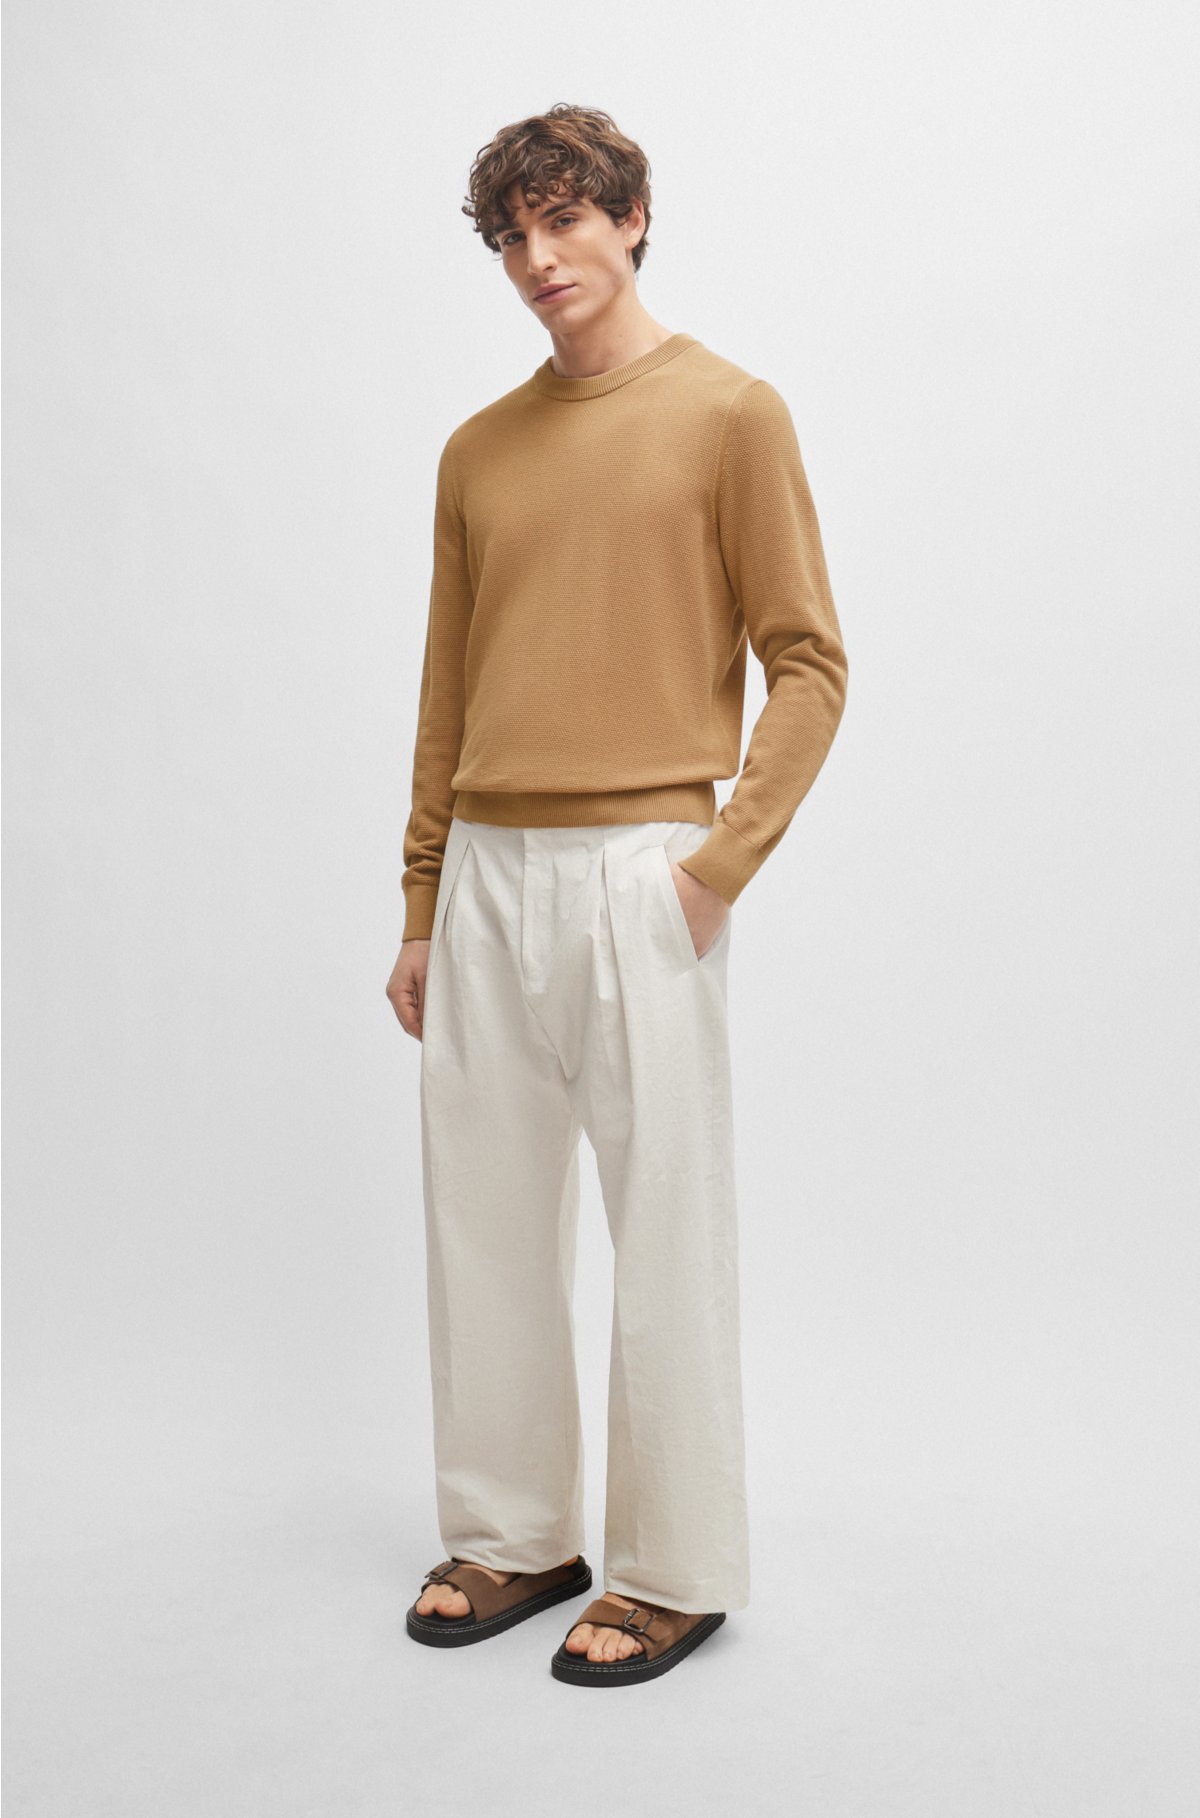 Formal trousers with front pleats in fluid material, White